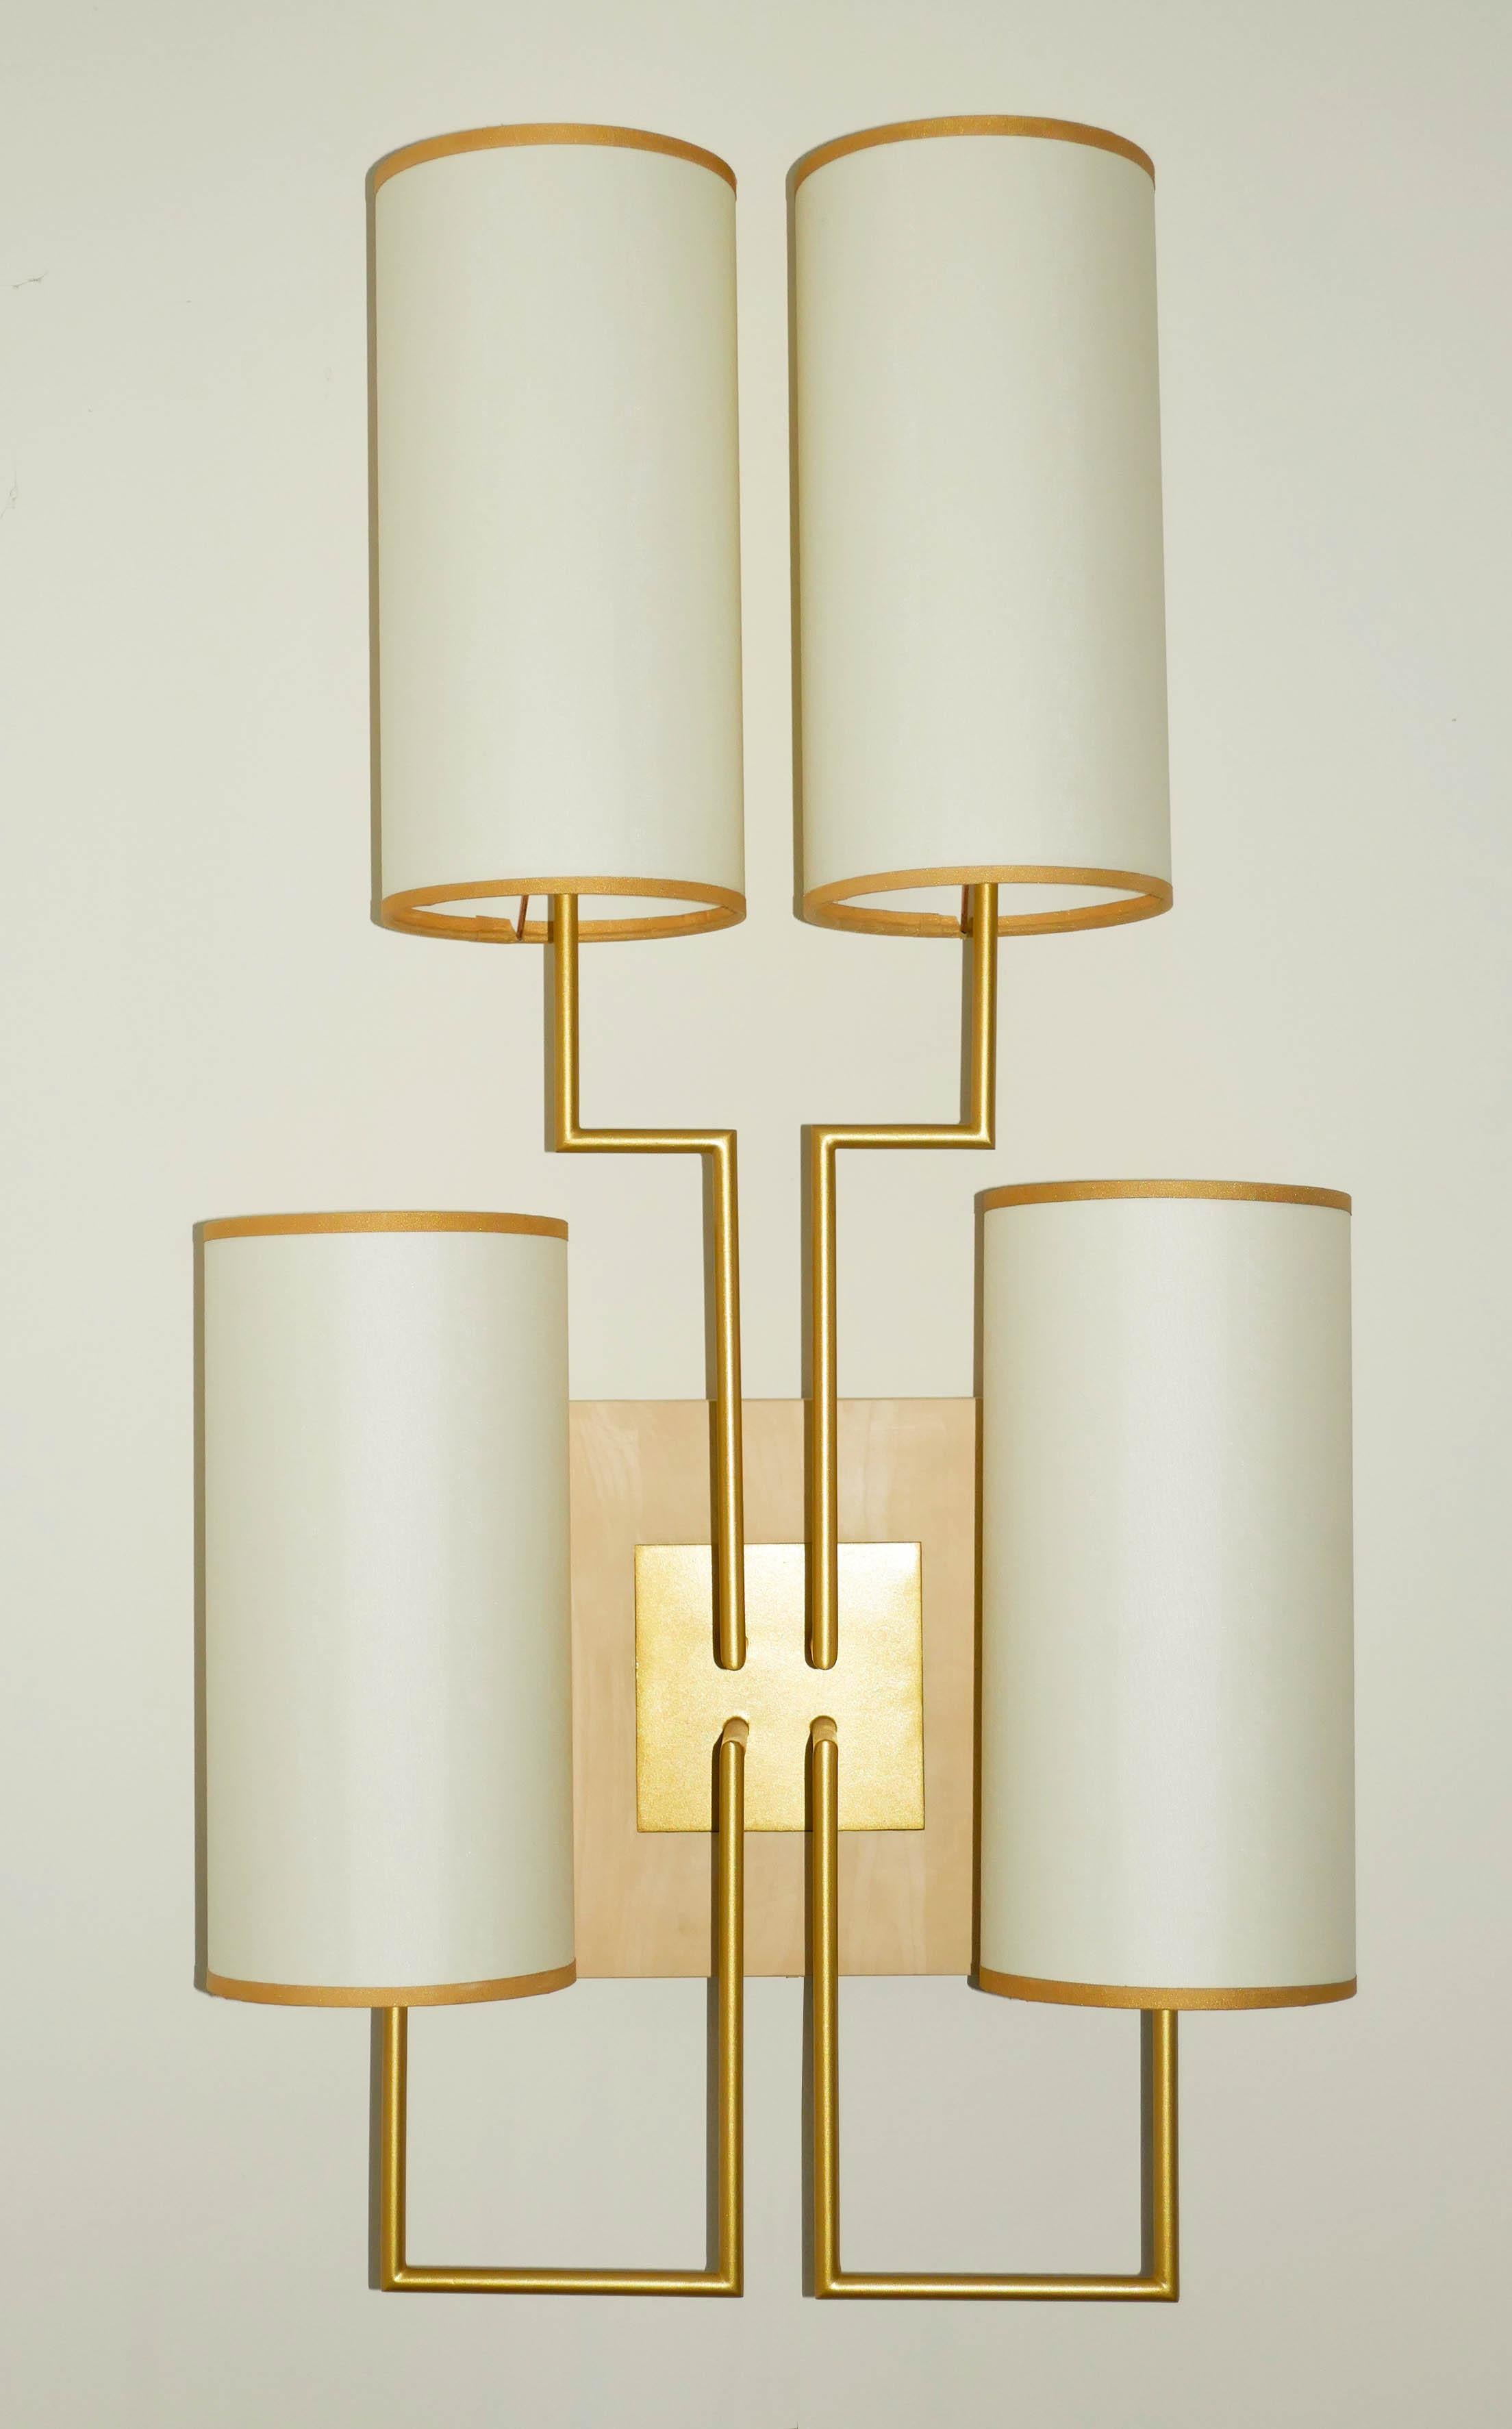 Pair of Wall Lamp Sconce in Gold Patina and White Lamp Shades For Sale 2